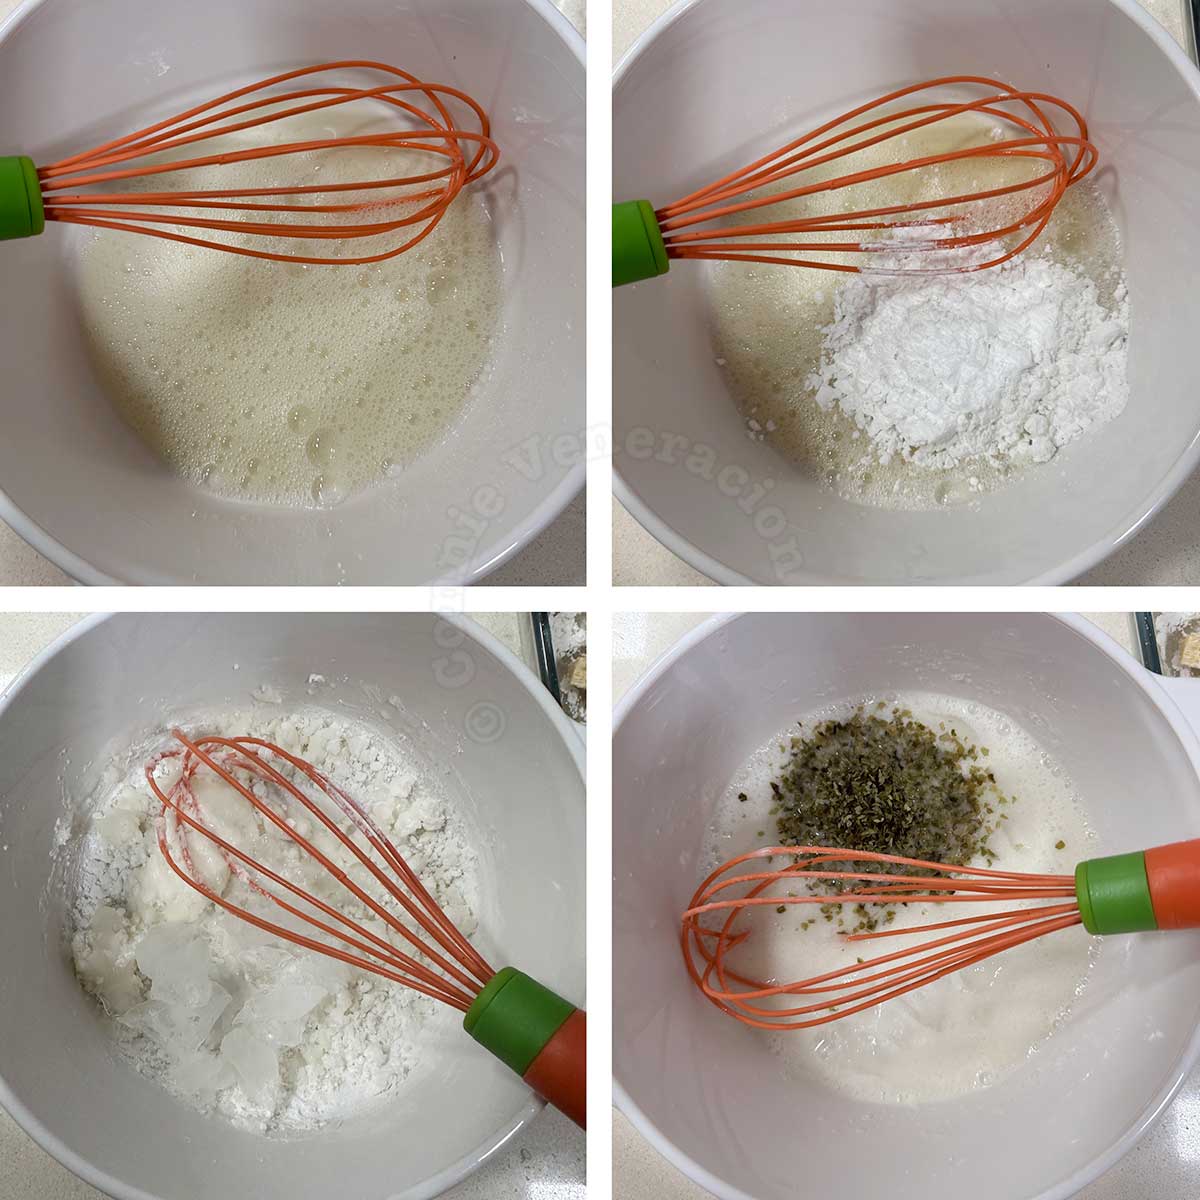 Whisking ice, water and starch